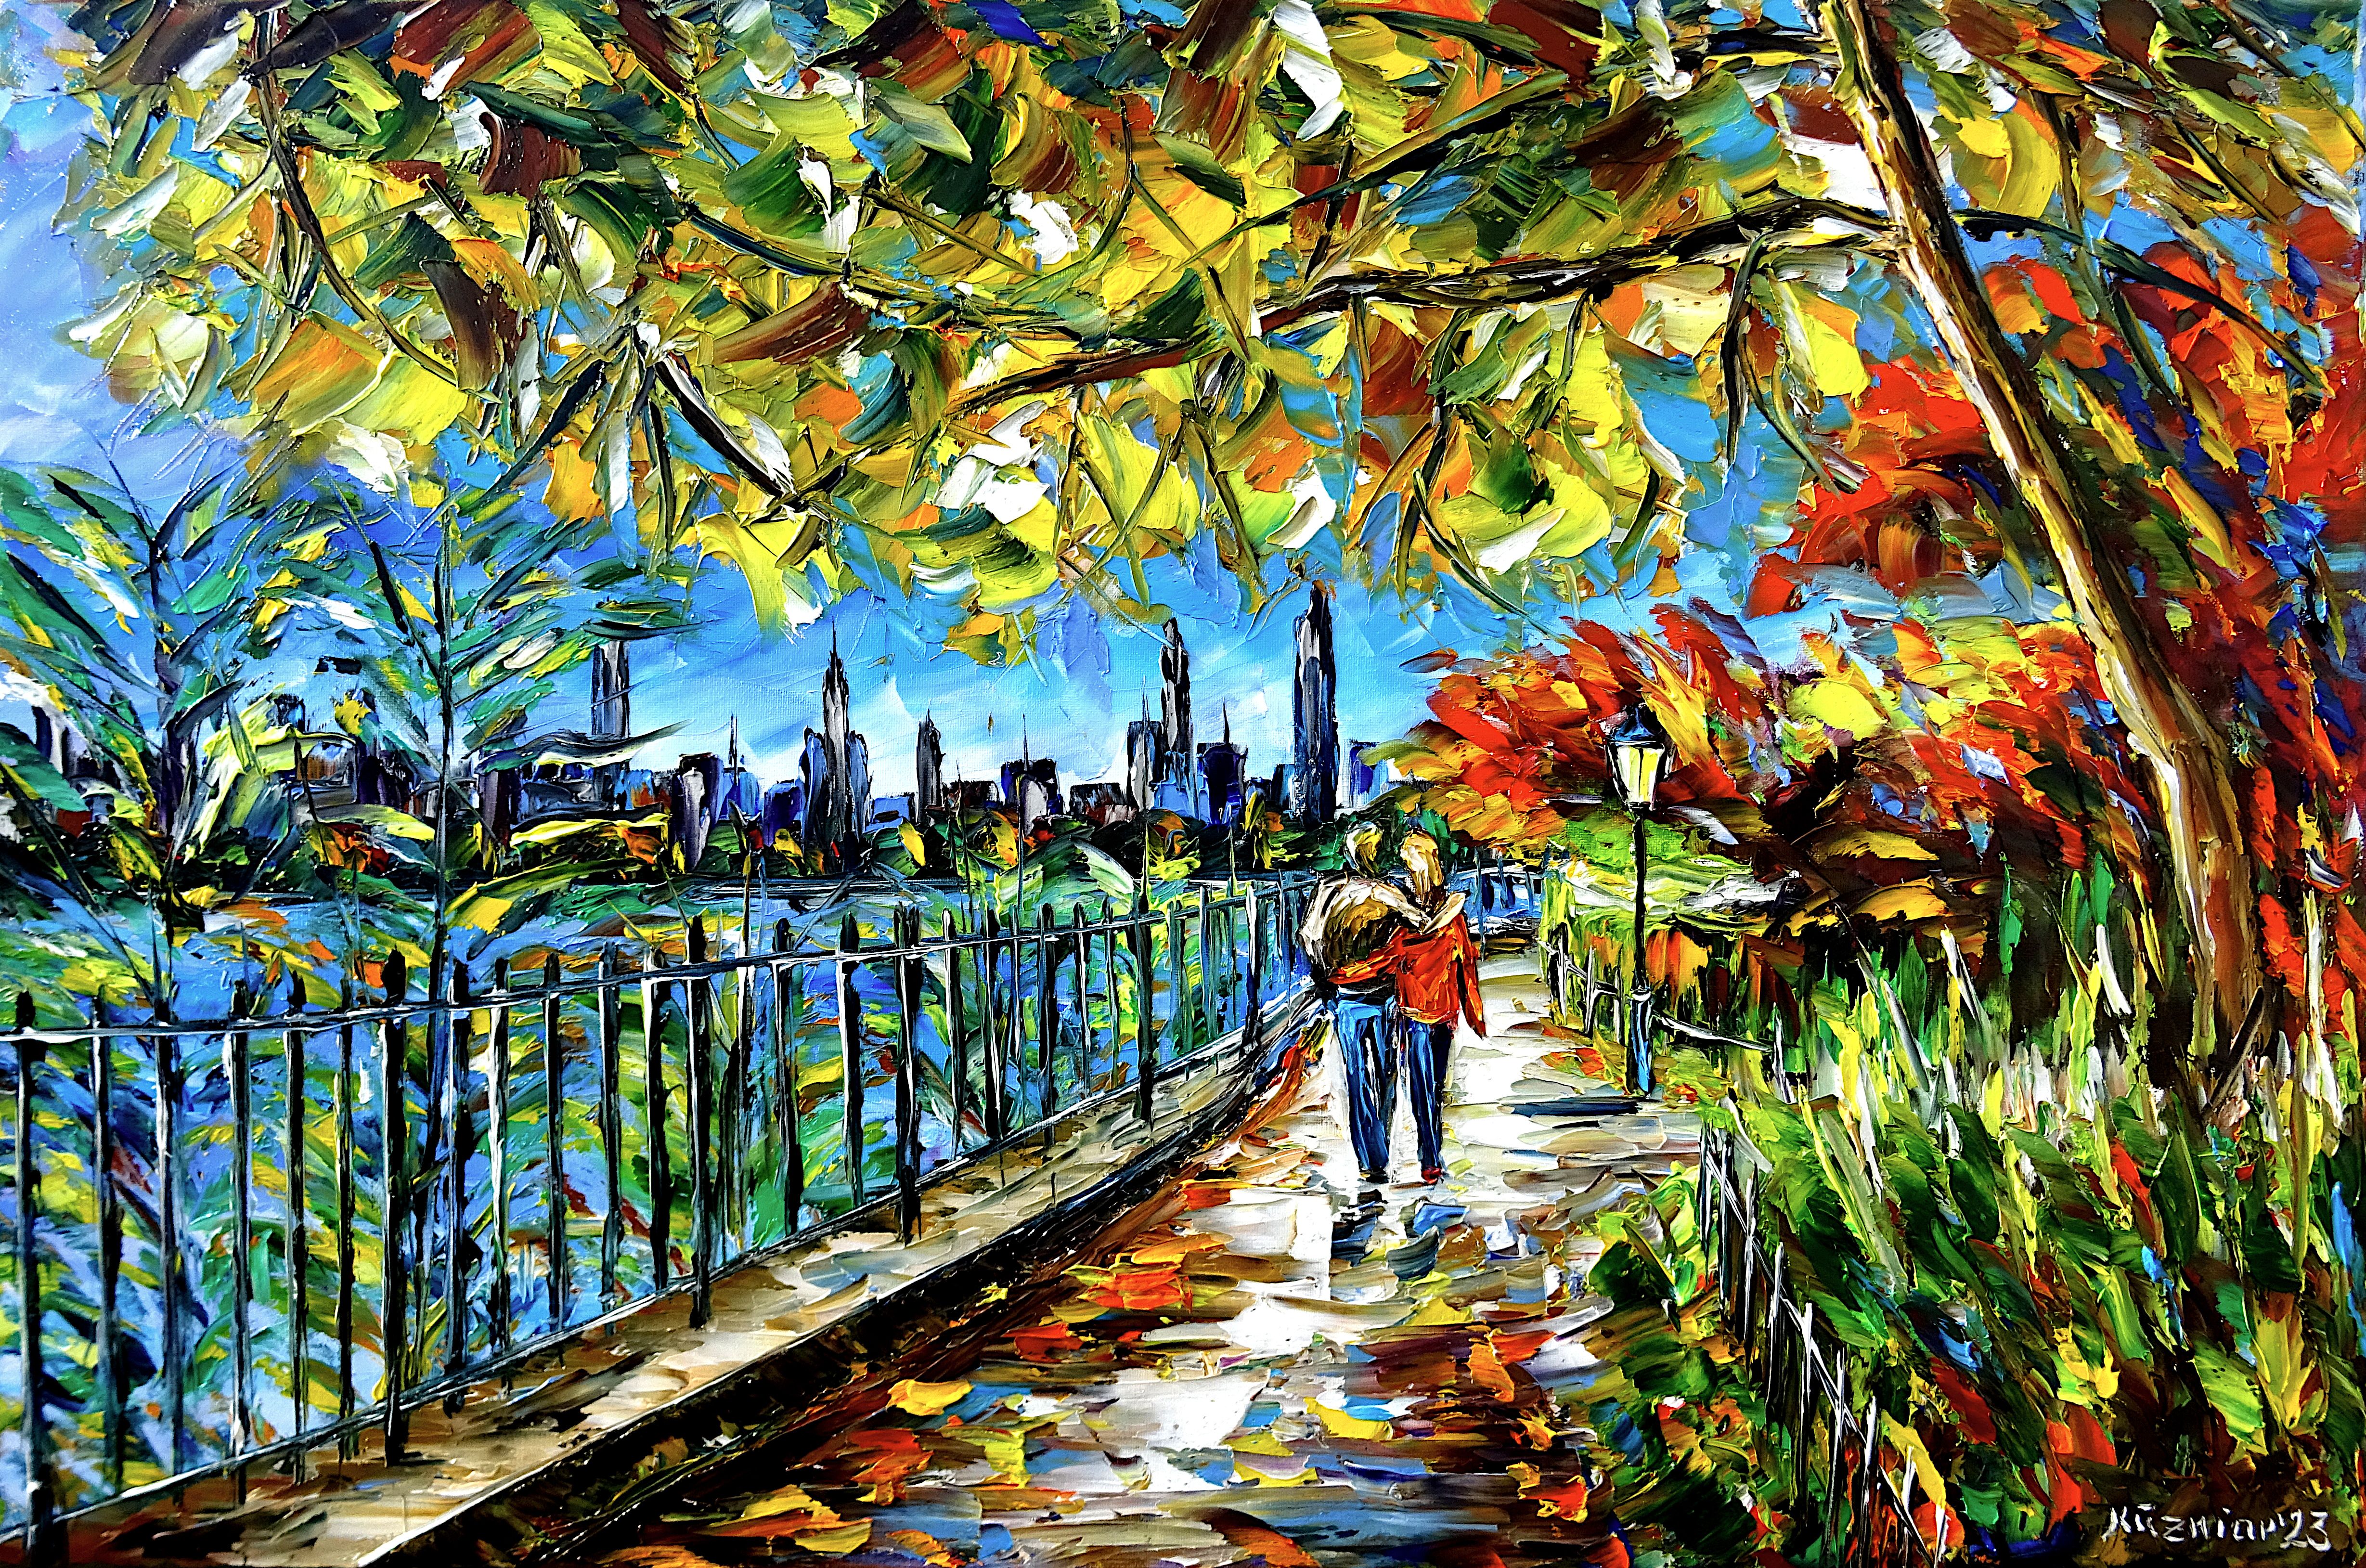 central park in autumn,walking in central park,walking by the river,ramble river,central park manhattan,manhattan in autumn,new york in autumn,lovers in central park,central park art,central park painting,central park picture,central park sidewalk,central park romance,park lantern,autumn park,loving couple hugging,lovers in autumn,love couple in autumn,love couple in the park,lovers in the park,walking in the park,park walk,autumn walk,park landscape,people in love,love,romance,romantic,romantic scene,autumn romance,autumn landscape,autumn beauty,autumn trees,autumn romantic,autumn picture,autumn painting,beautiful autumn,park in autumn,palette knife oil painting,modern art,figurative art,figurative painting,contemporary painting,abstract painting,lively colors,colorful painting,bright colors,impasto painting